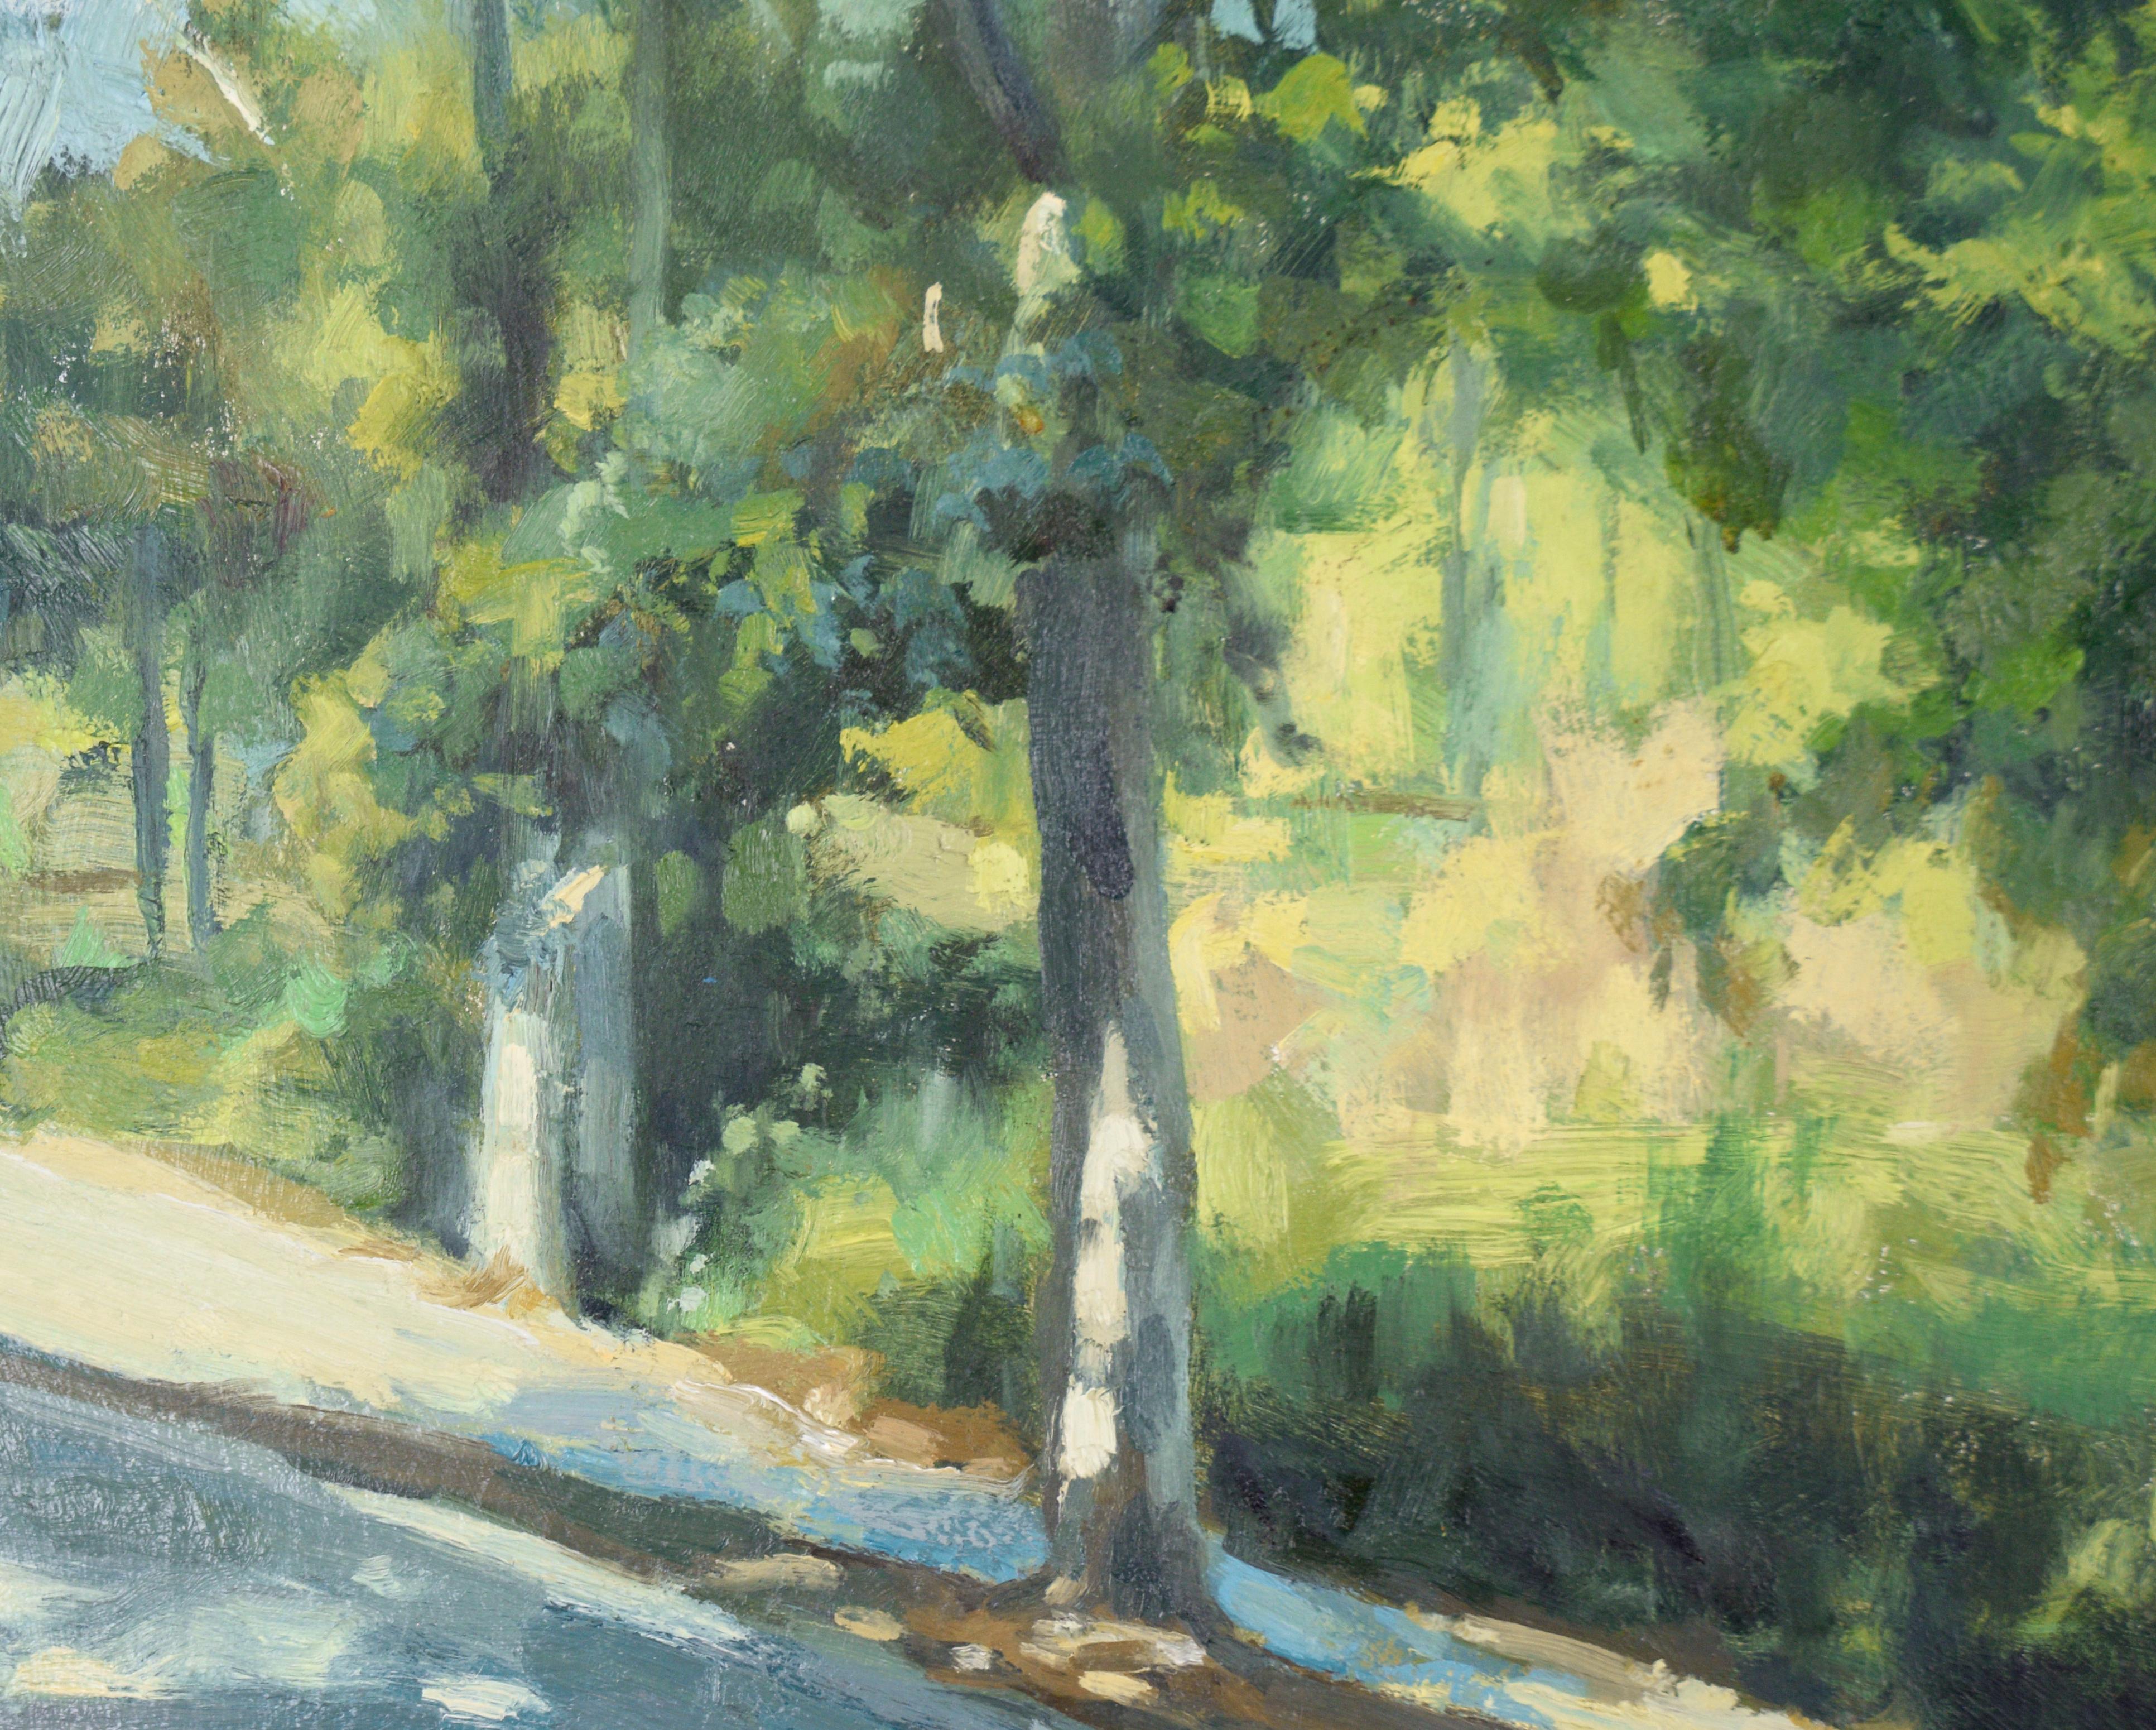 Sidewalk Along the Park - Landscape in Oil on Canvas - Impressionist Painting by Gholam Yunessi